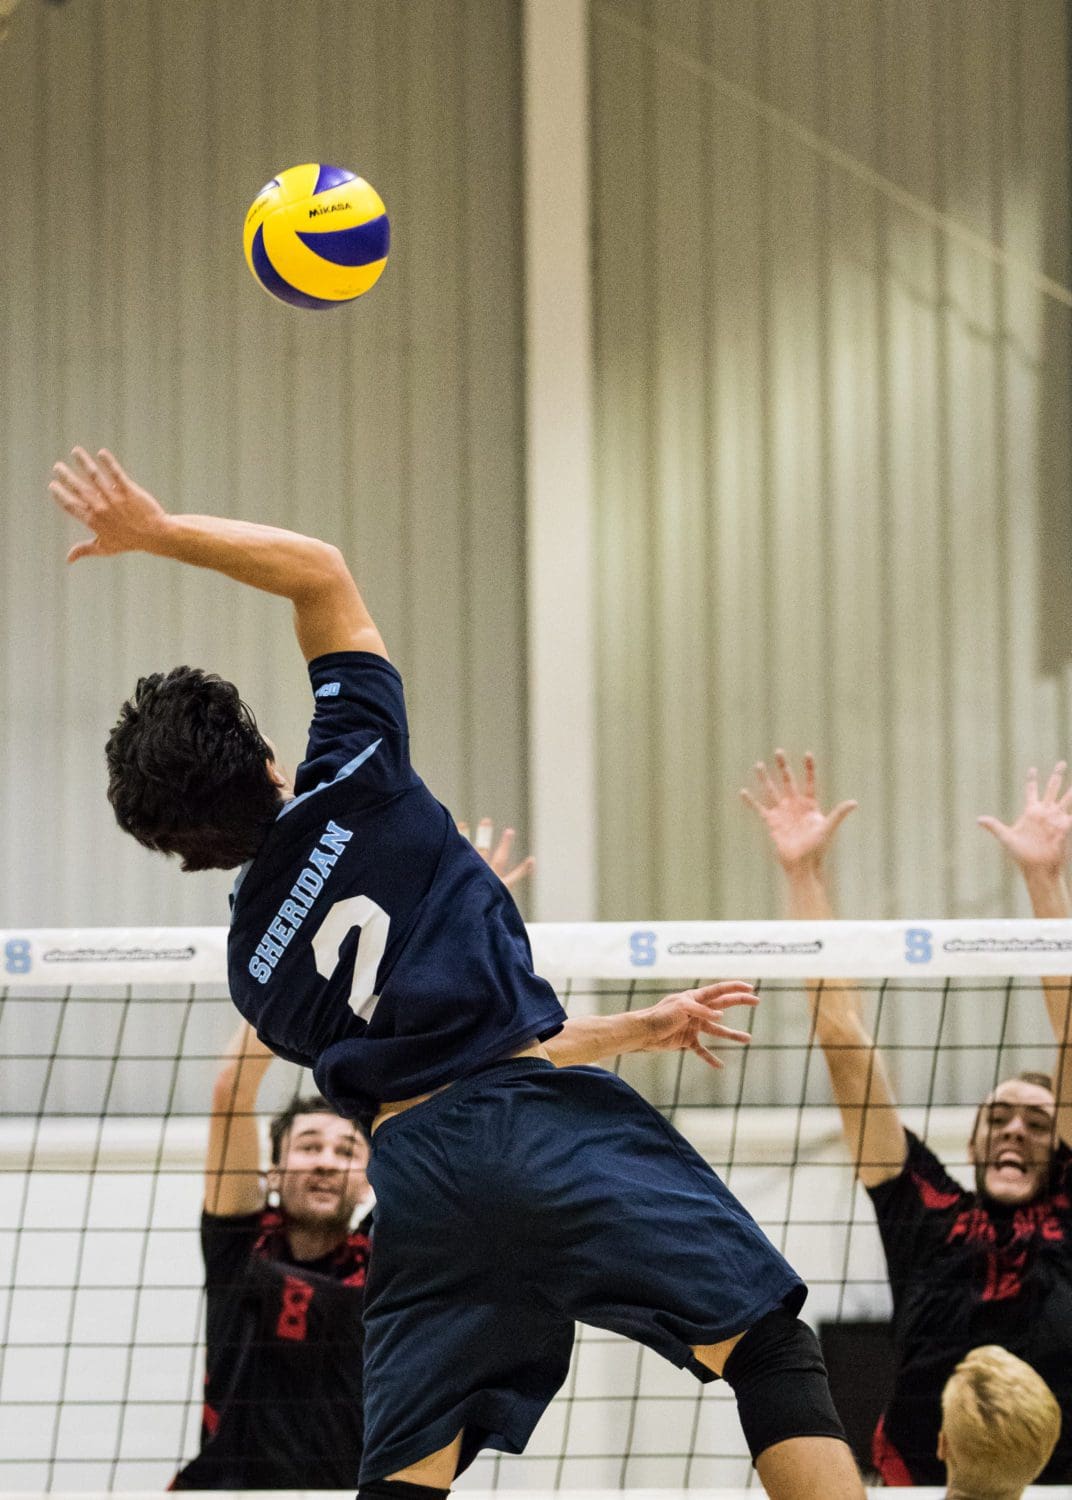 OAKVILLE, ON - Oct. 29, 2016 - A Sheridan player rises above the rest.